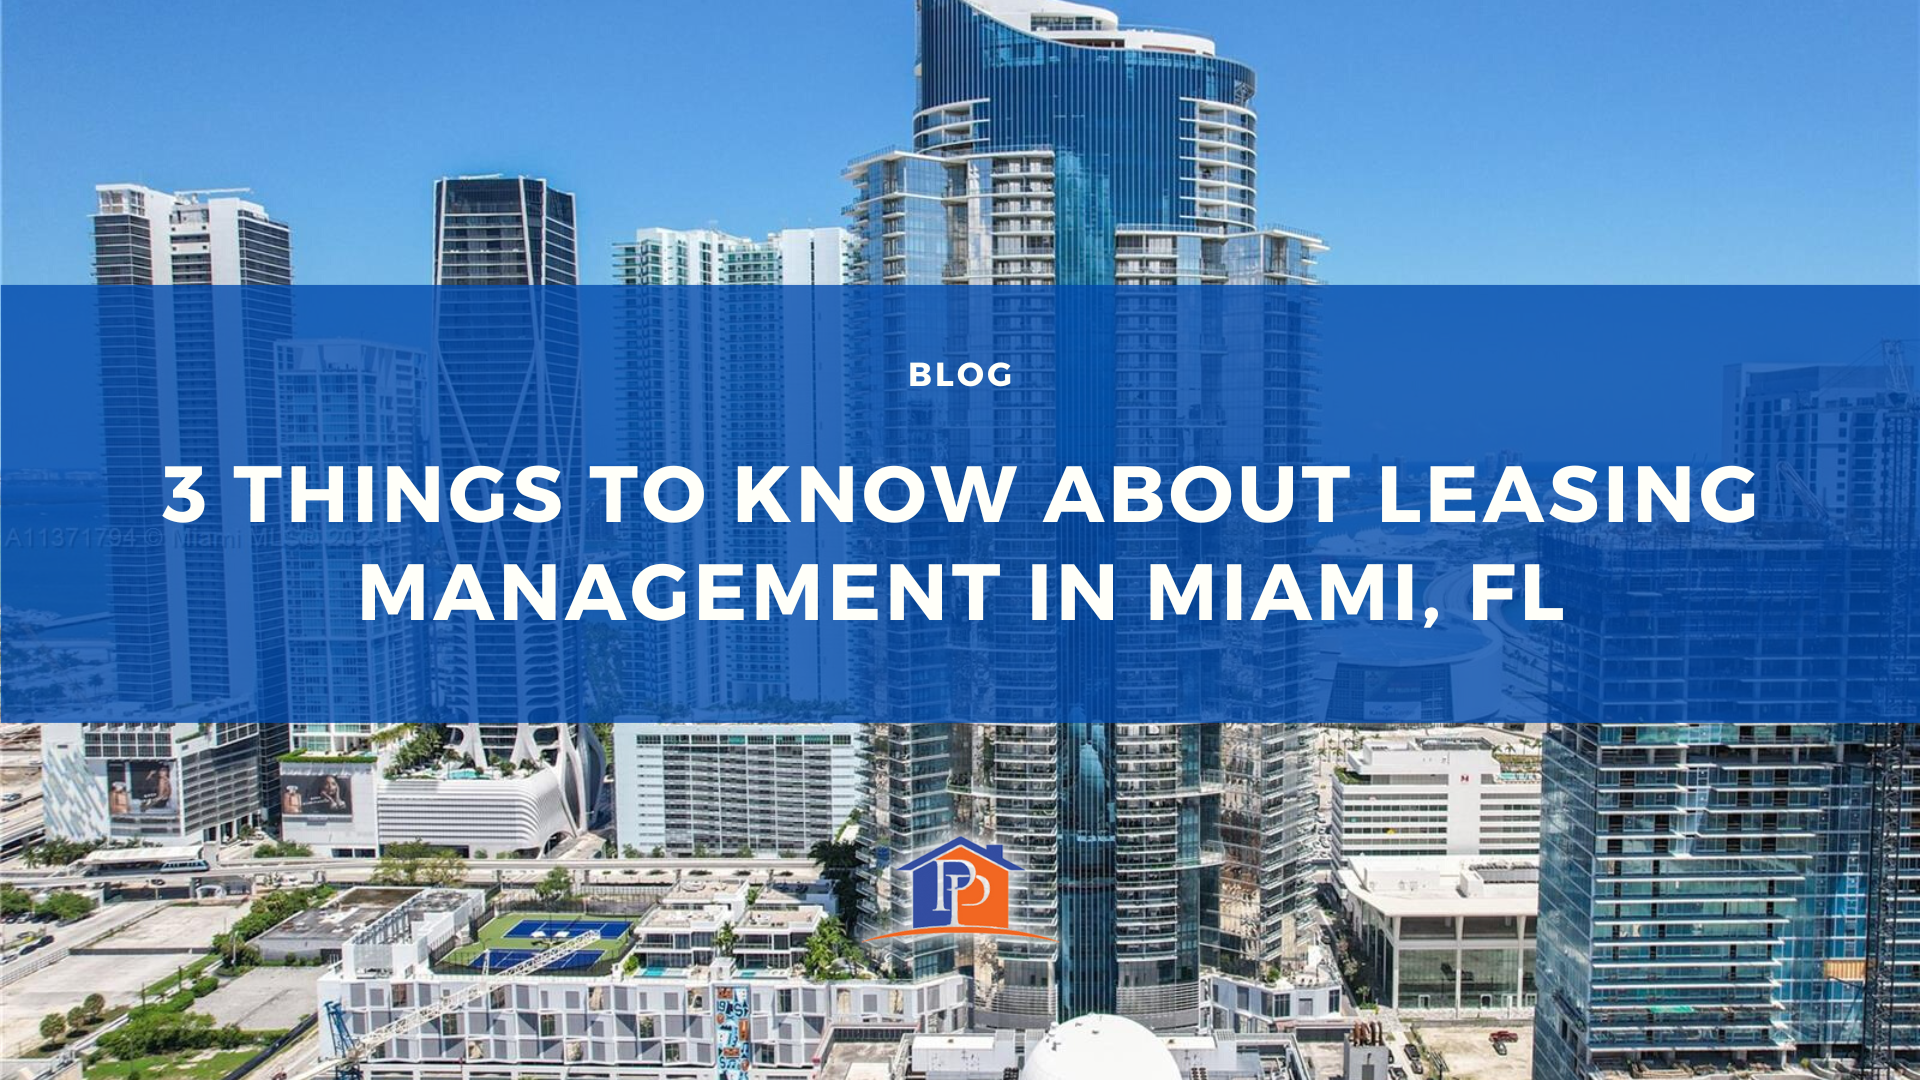 3 Things to Know About Leasing Management in Miami, FL